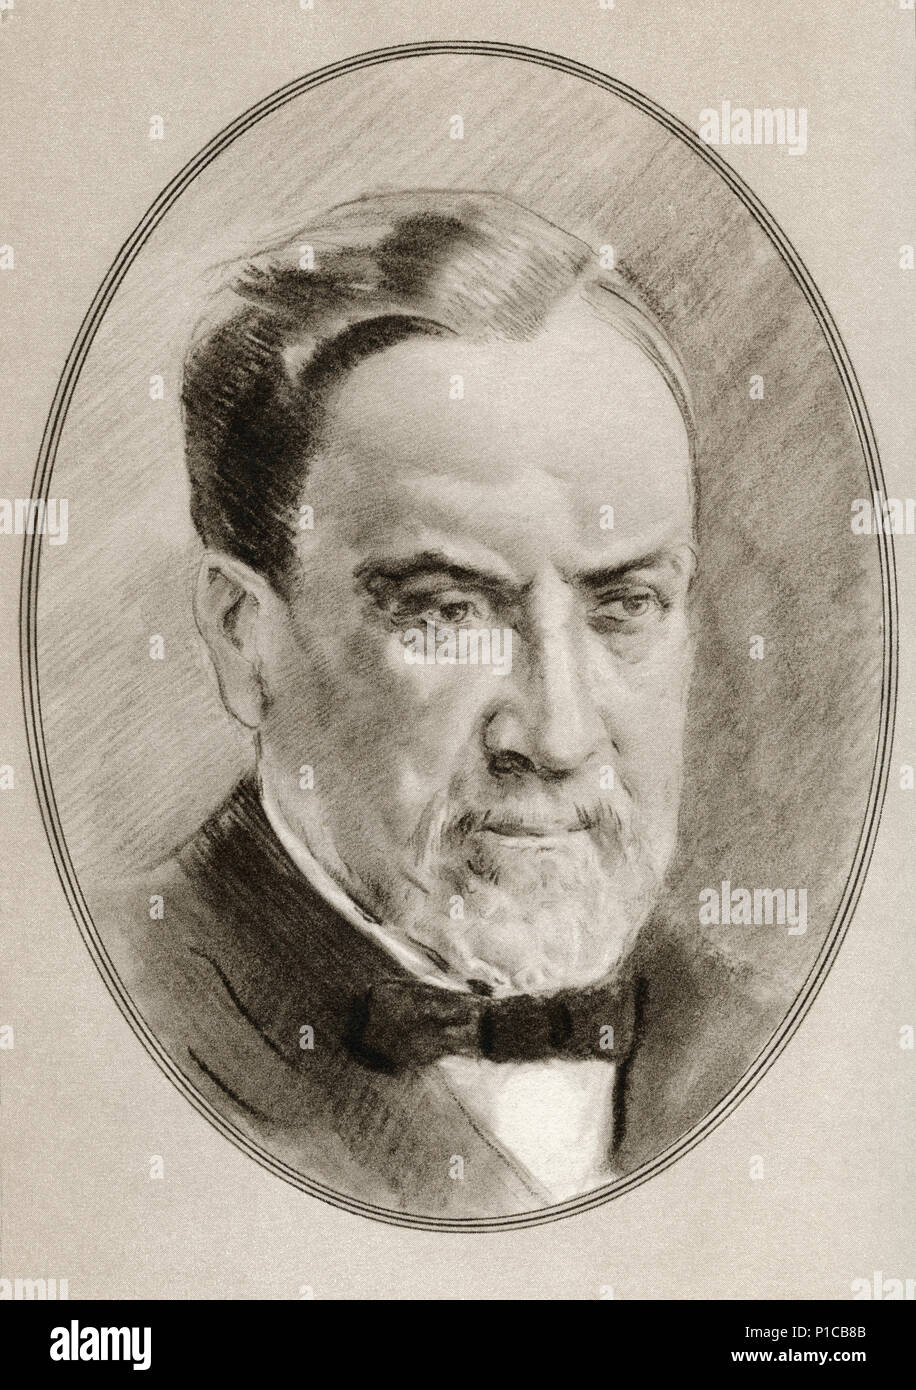 Louis Pasteur, 1822 –1895.  French biologist, microbiologist and chemist renowned for his discoveries of the principles of vaccination, microbial fermentation and pasteurization.  Illustration by Gordon Ross, American artist and illustrator (1873-1946), from Living Biographies of Great Scientists. Stock Photo